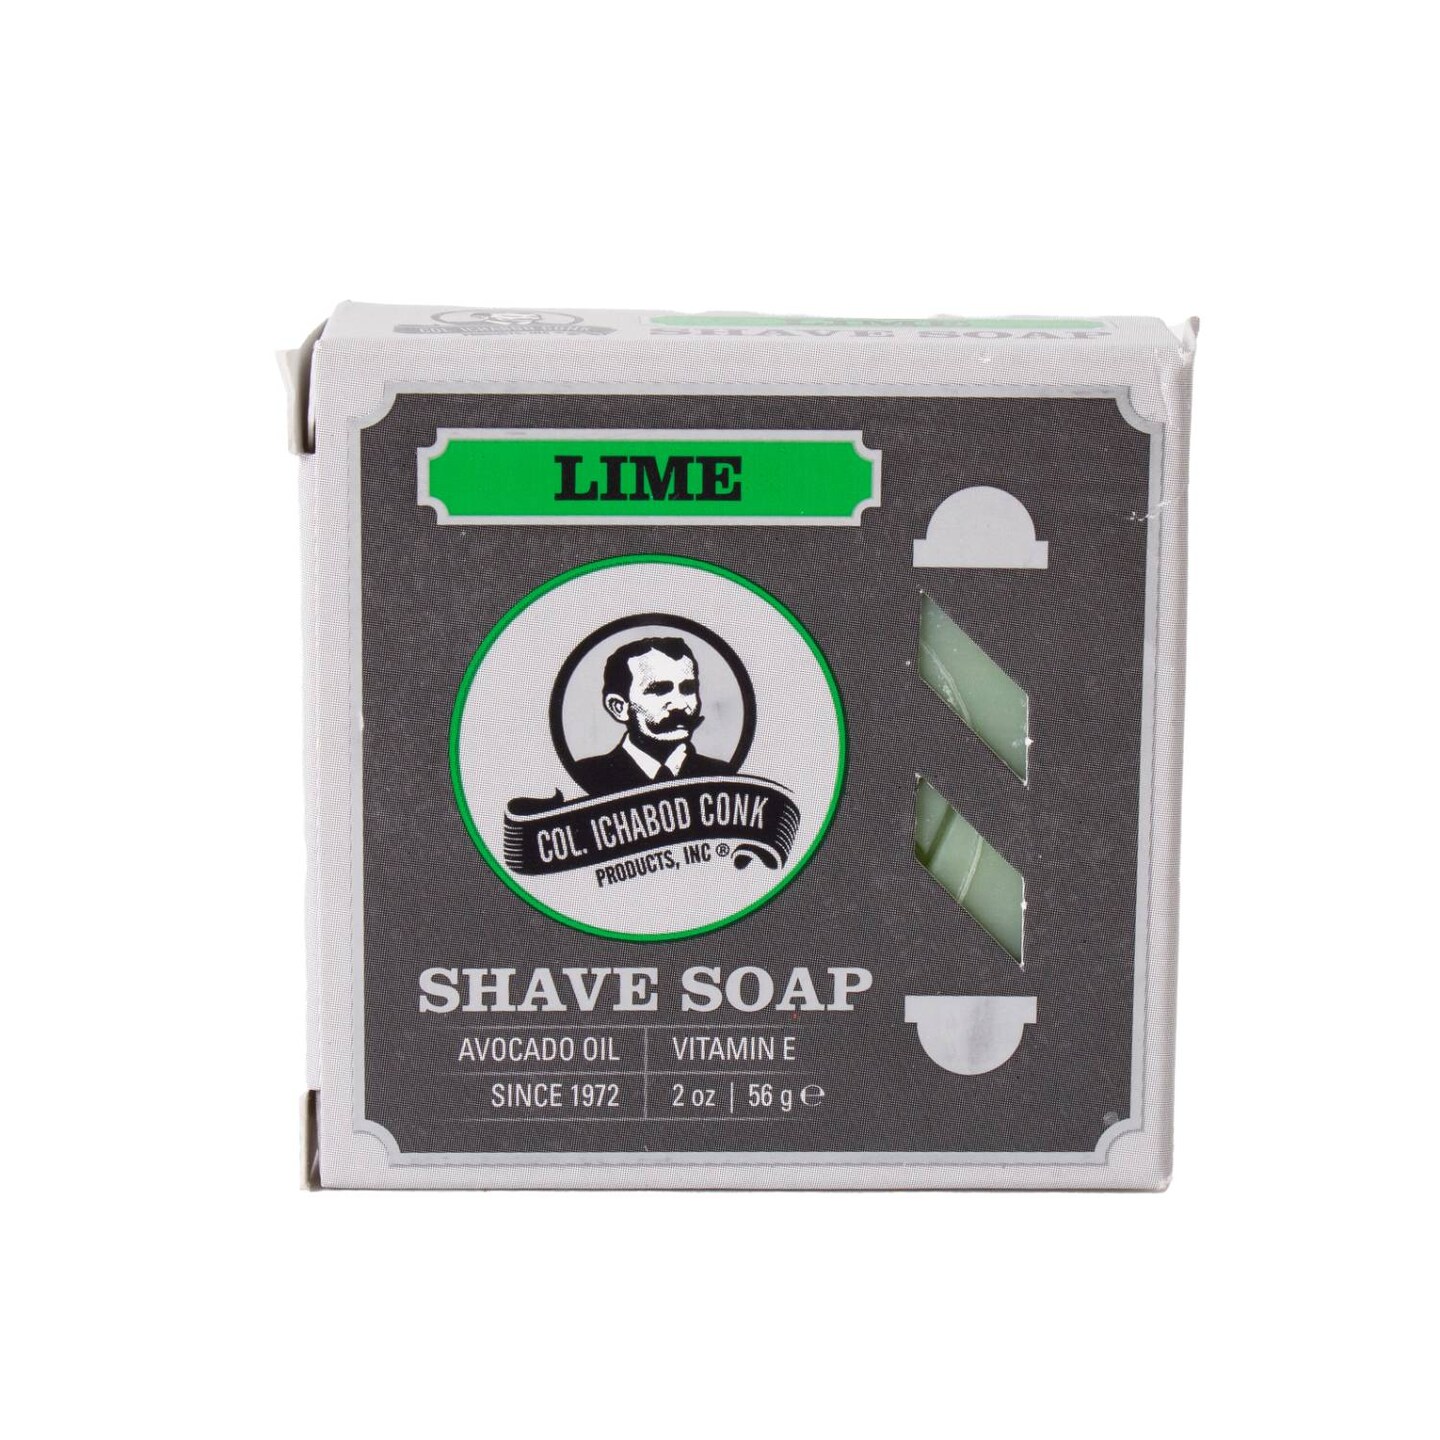 Col Conk Lime Shaving Soap - Traditional Glycerine Lime Scented Shave Soap Bar